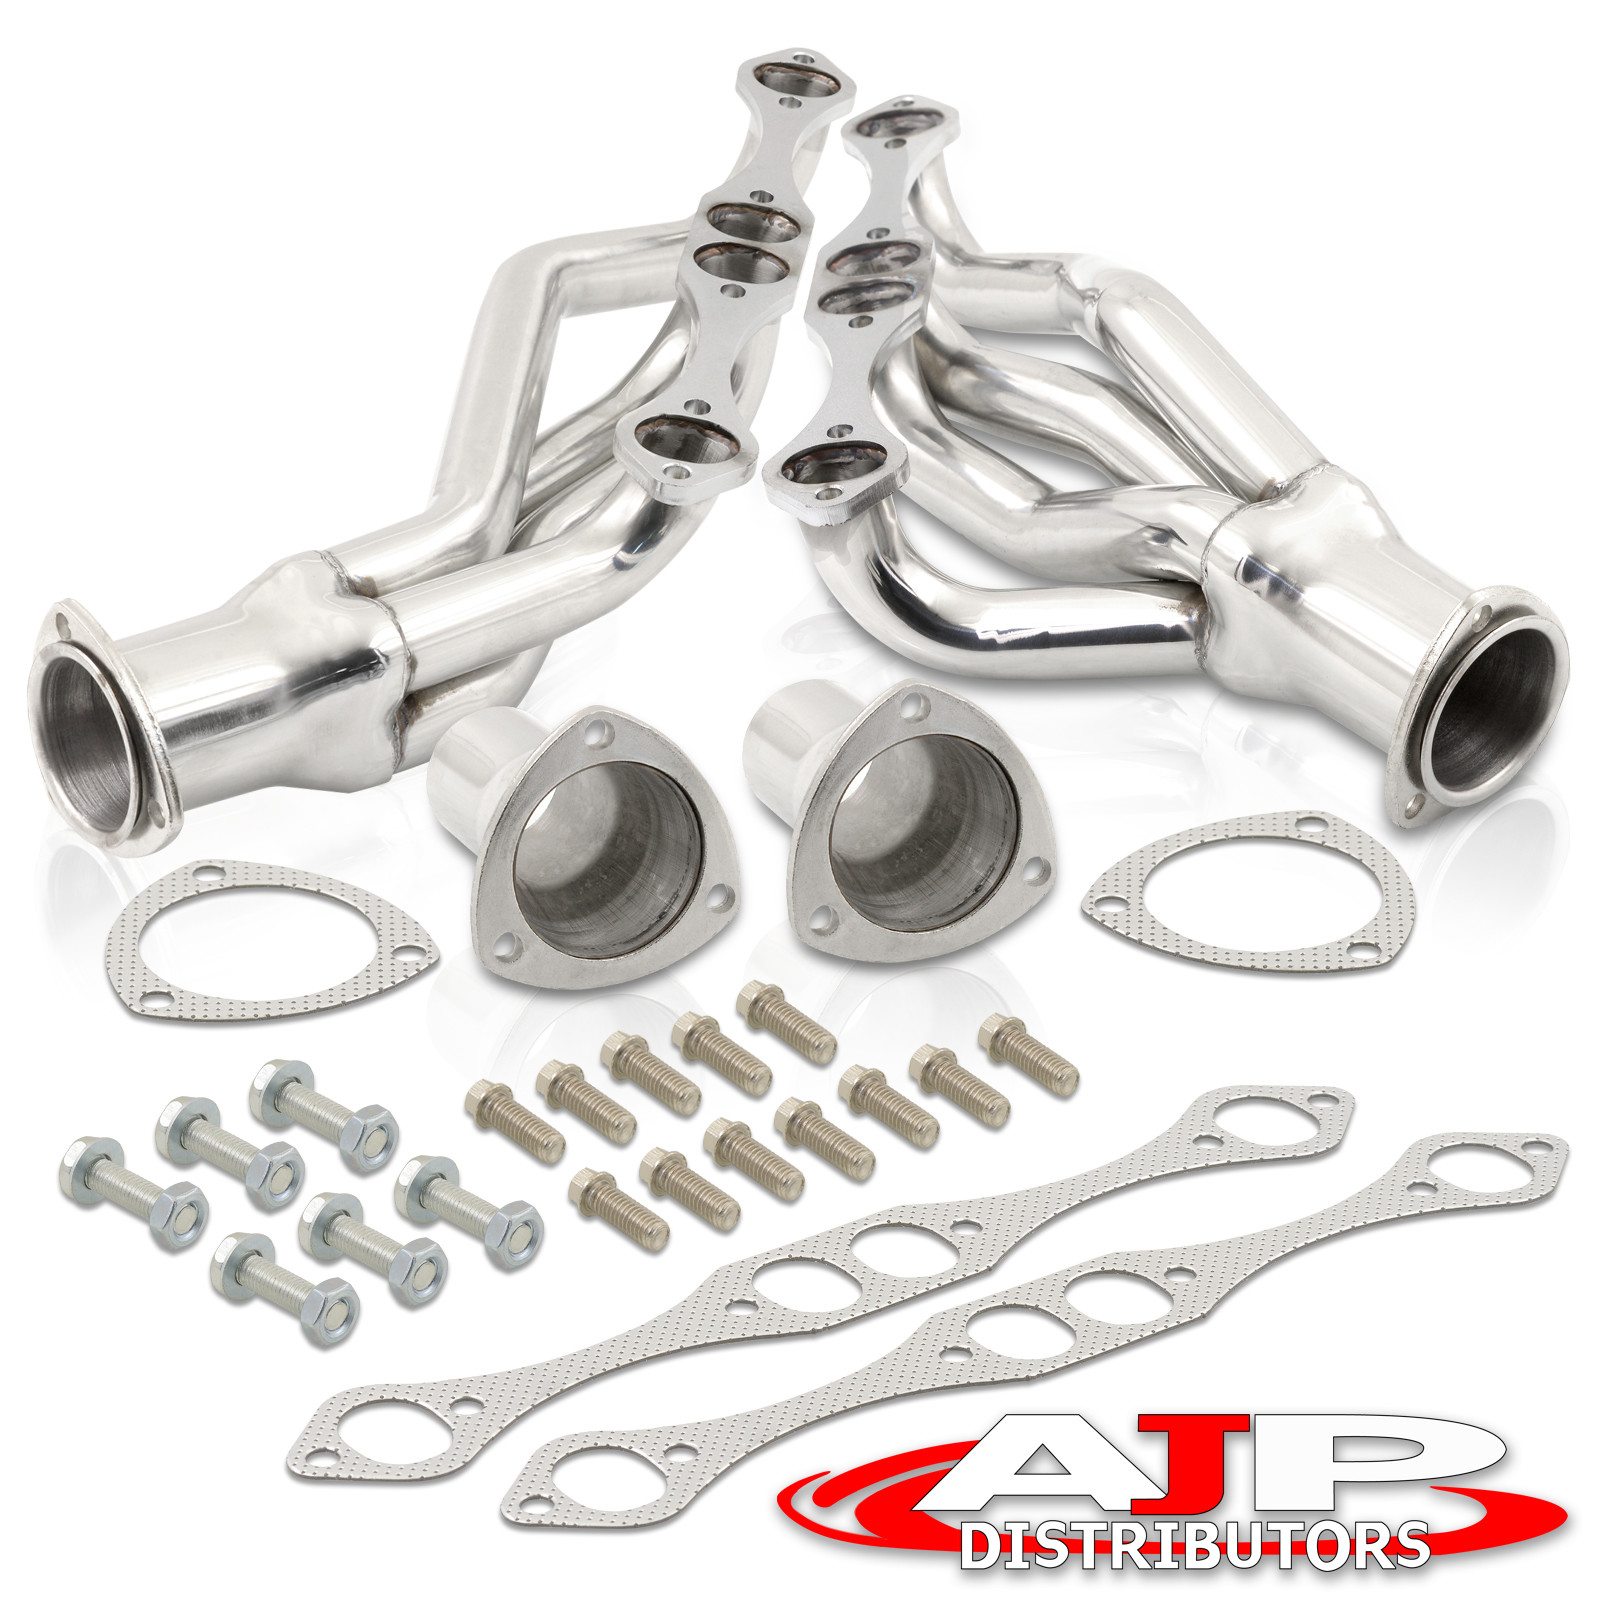 Stainless Exhaust Shorty Headers Kit For Chevy Small Block 265 305 327.